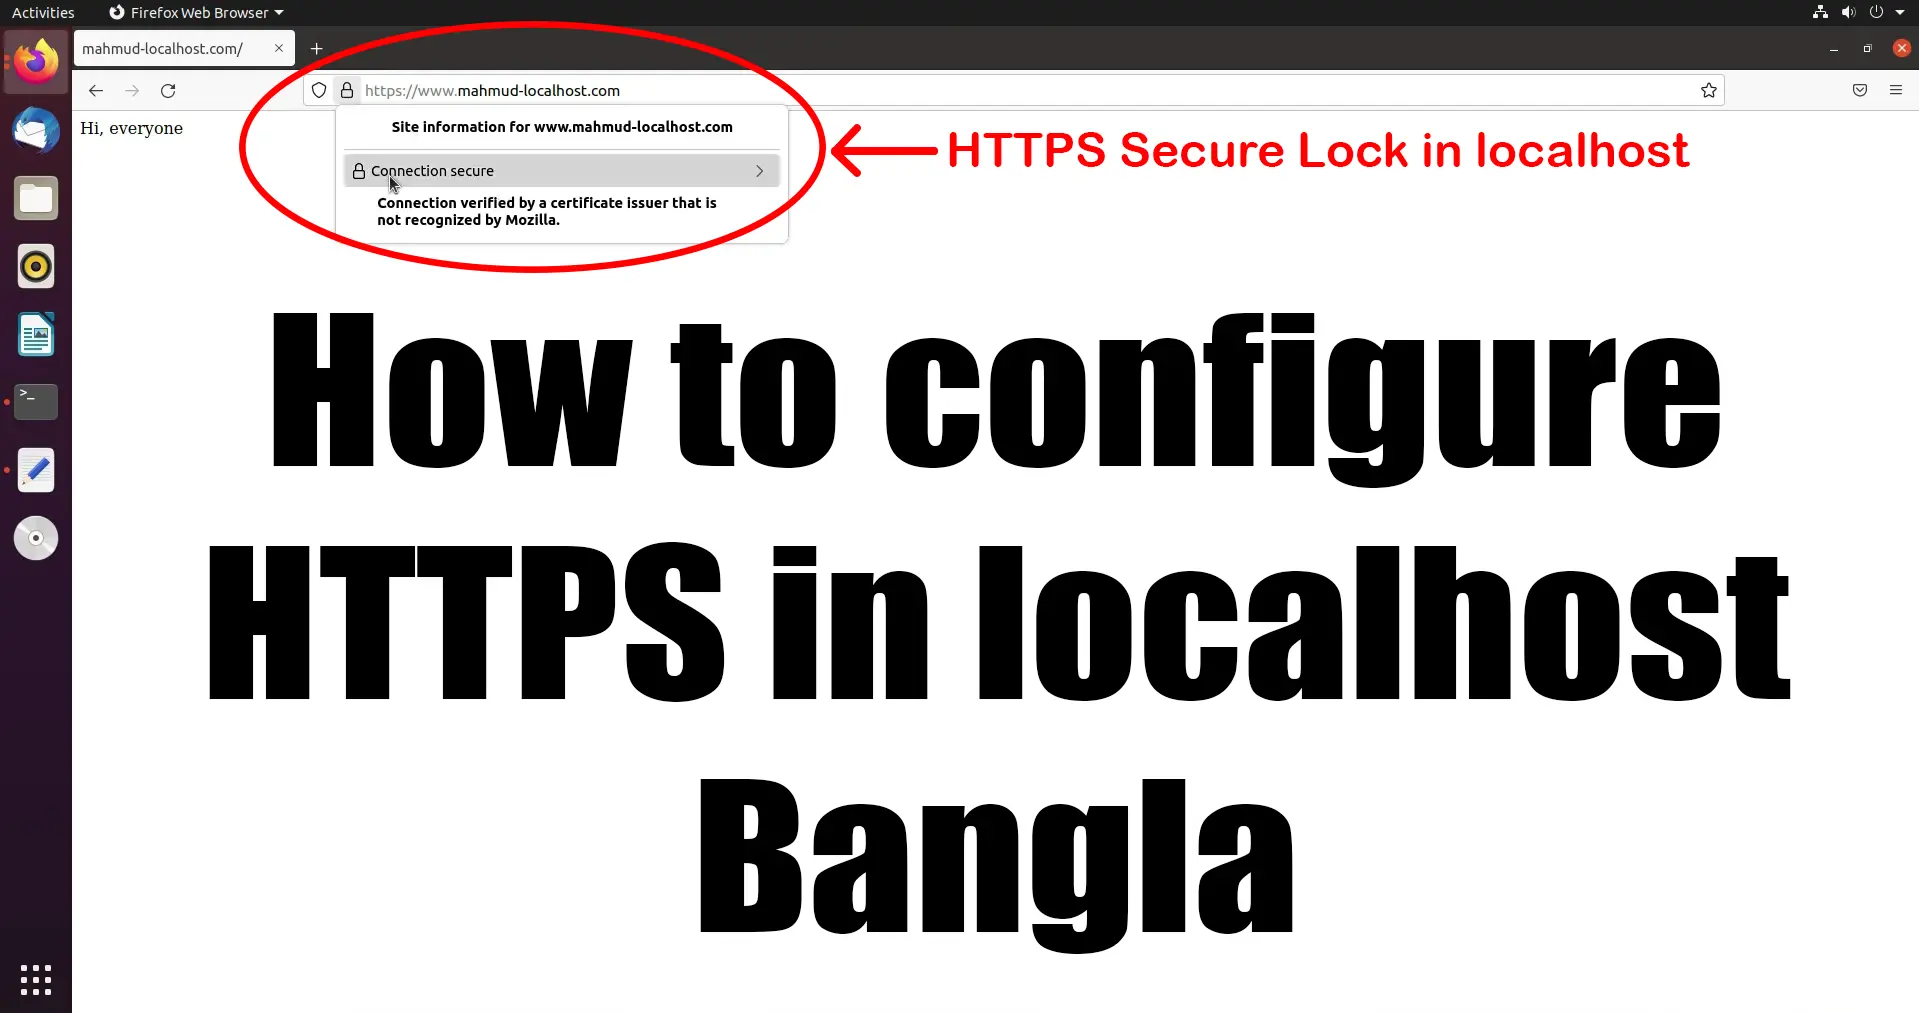 How to configure https in localhost bangla